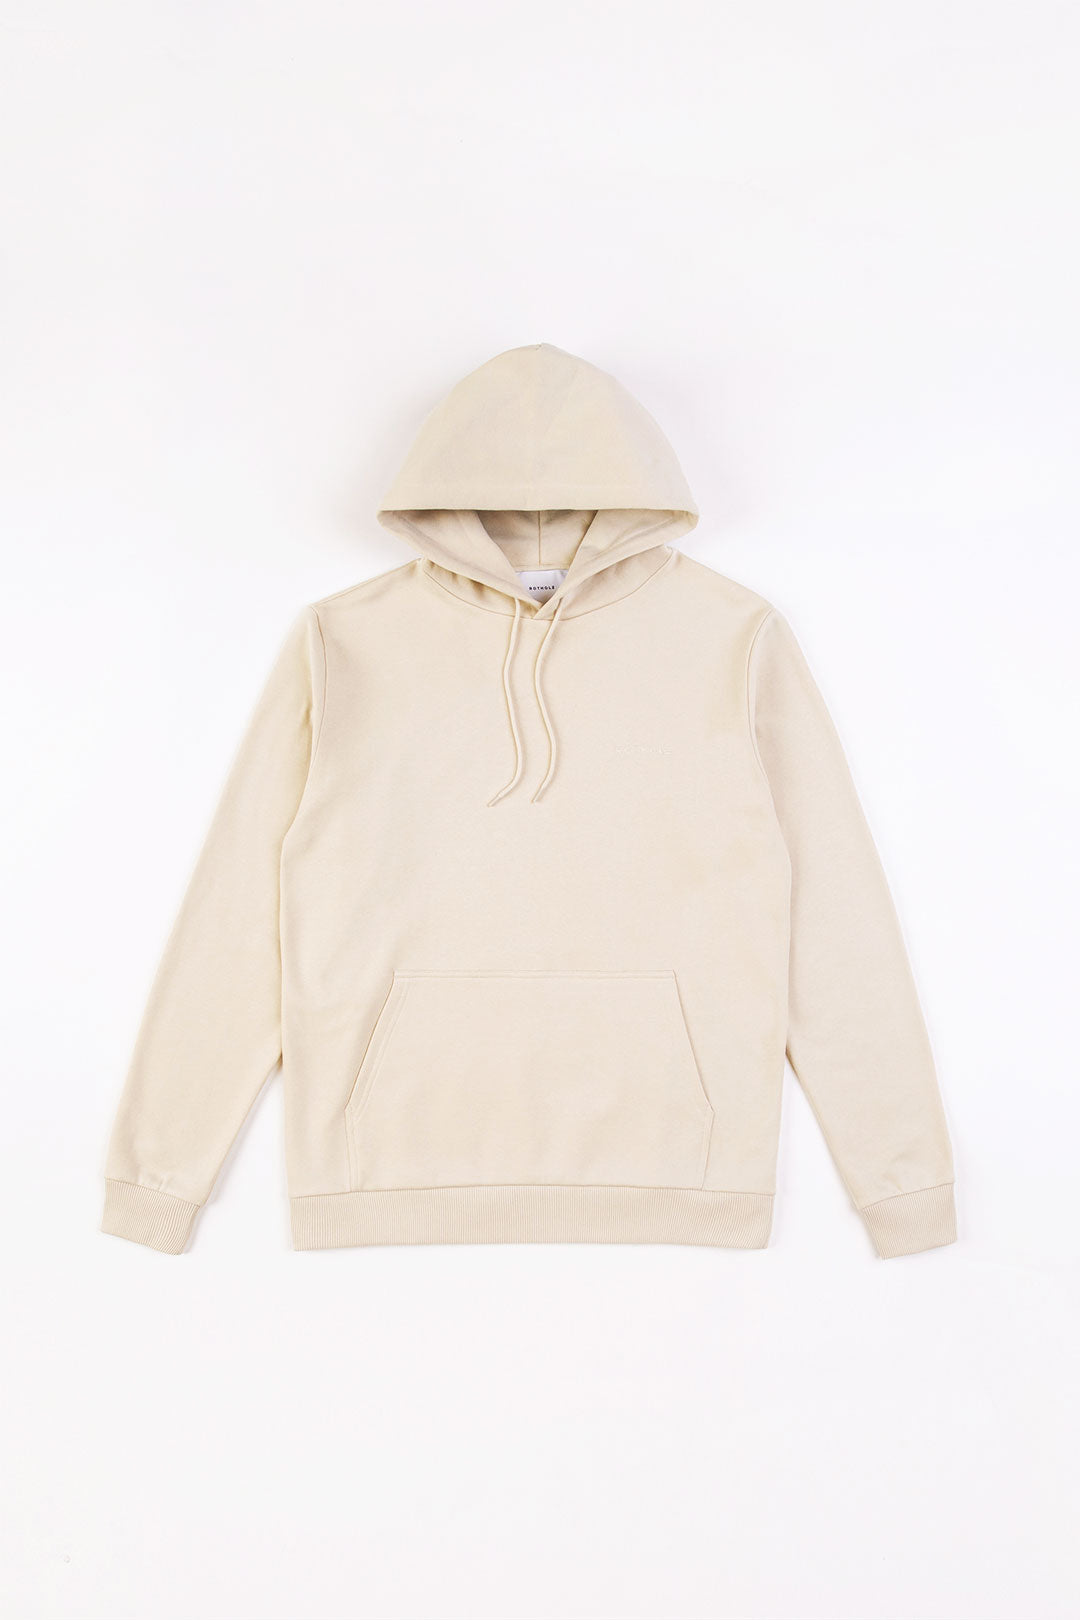 Beige hoodie logo made of 100% organic cotton from Rotholz